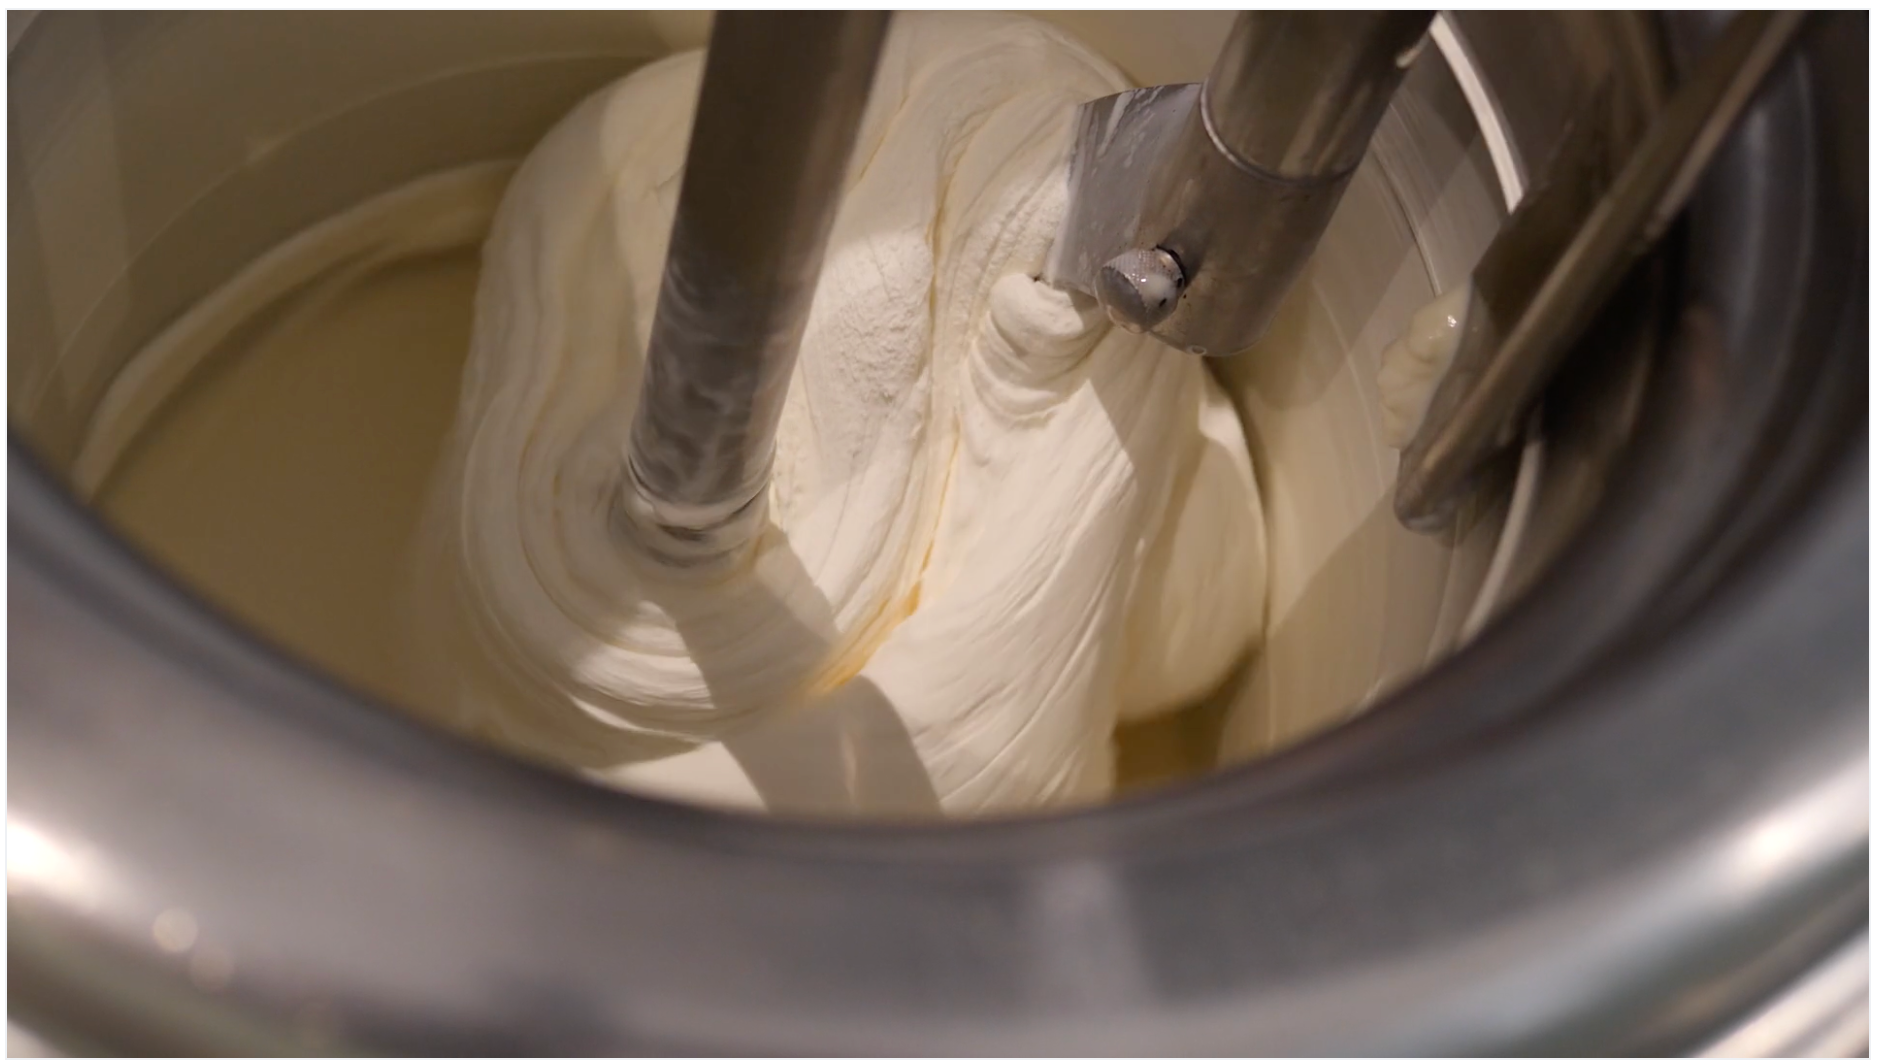 Load video: Traditional Gelato Making